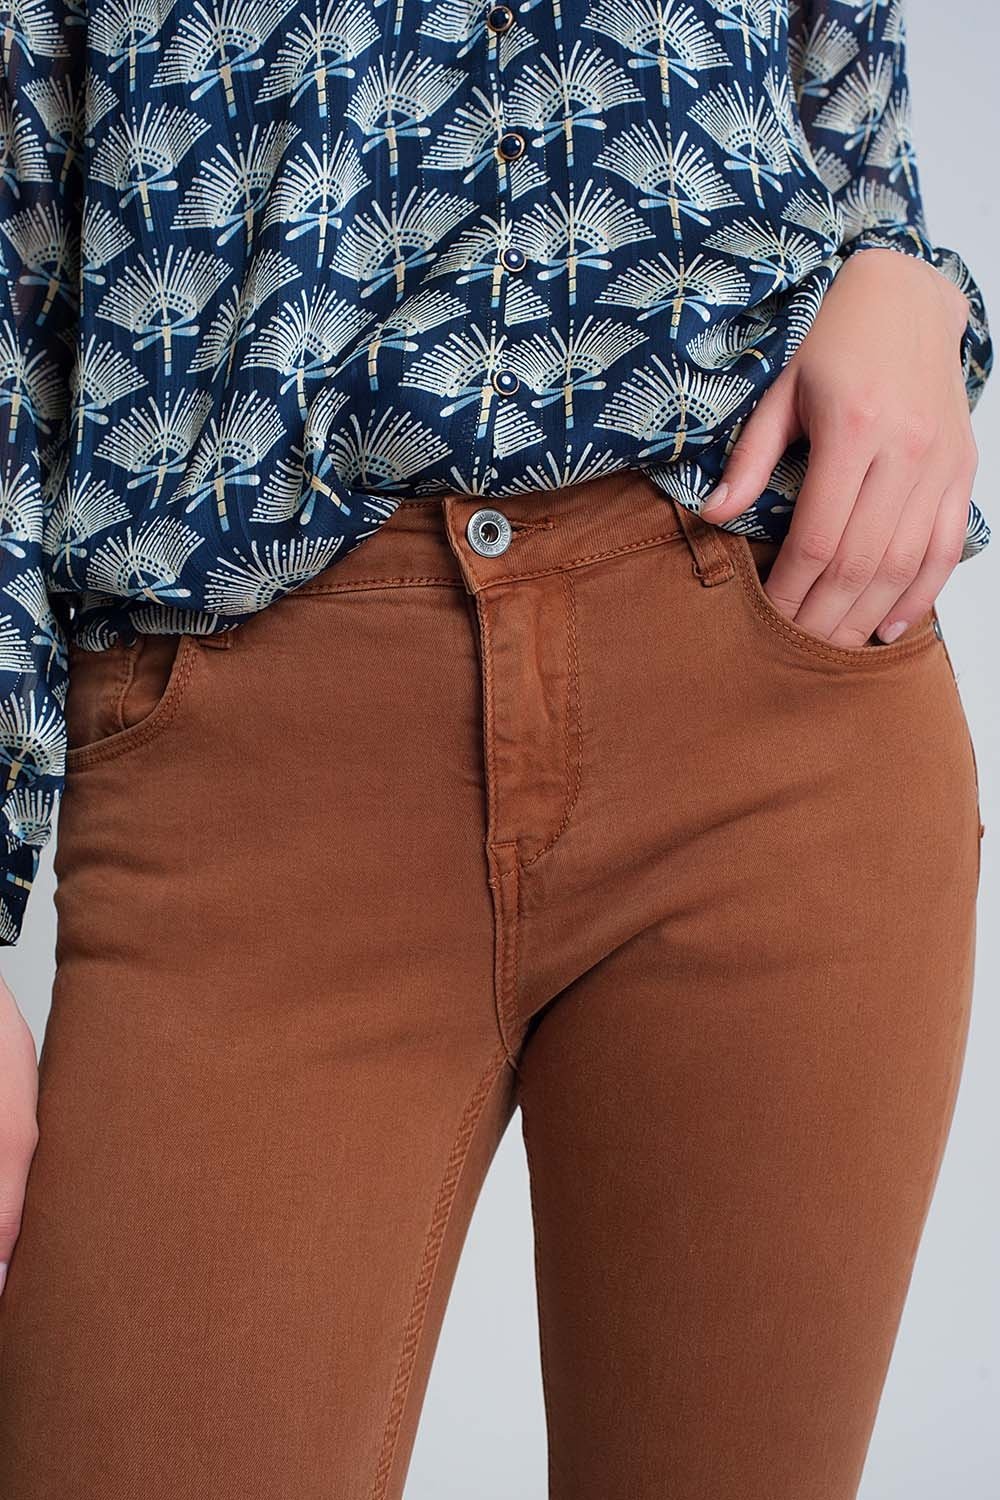 High Waisted Super Skinny Pants in Camel